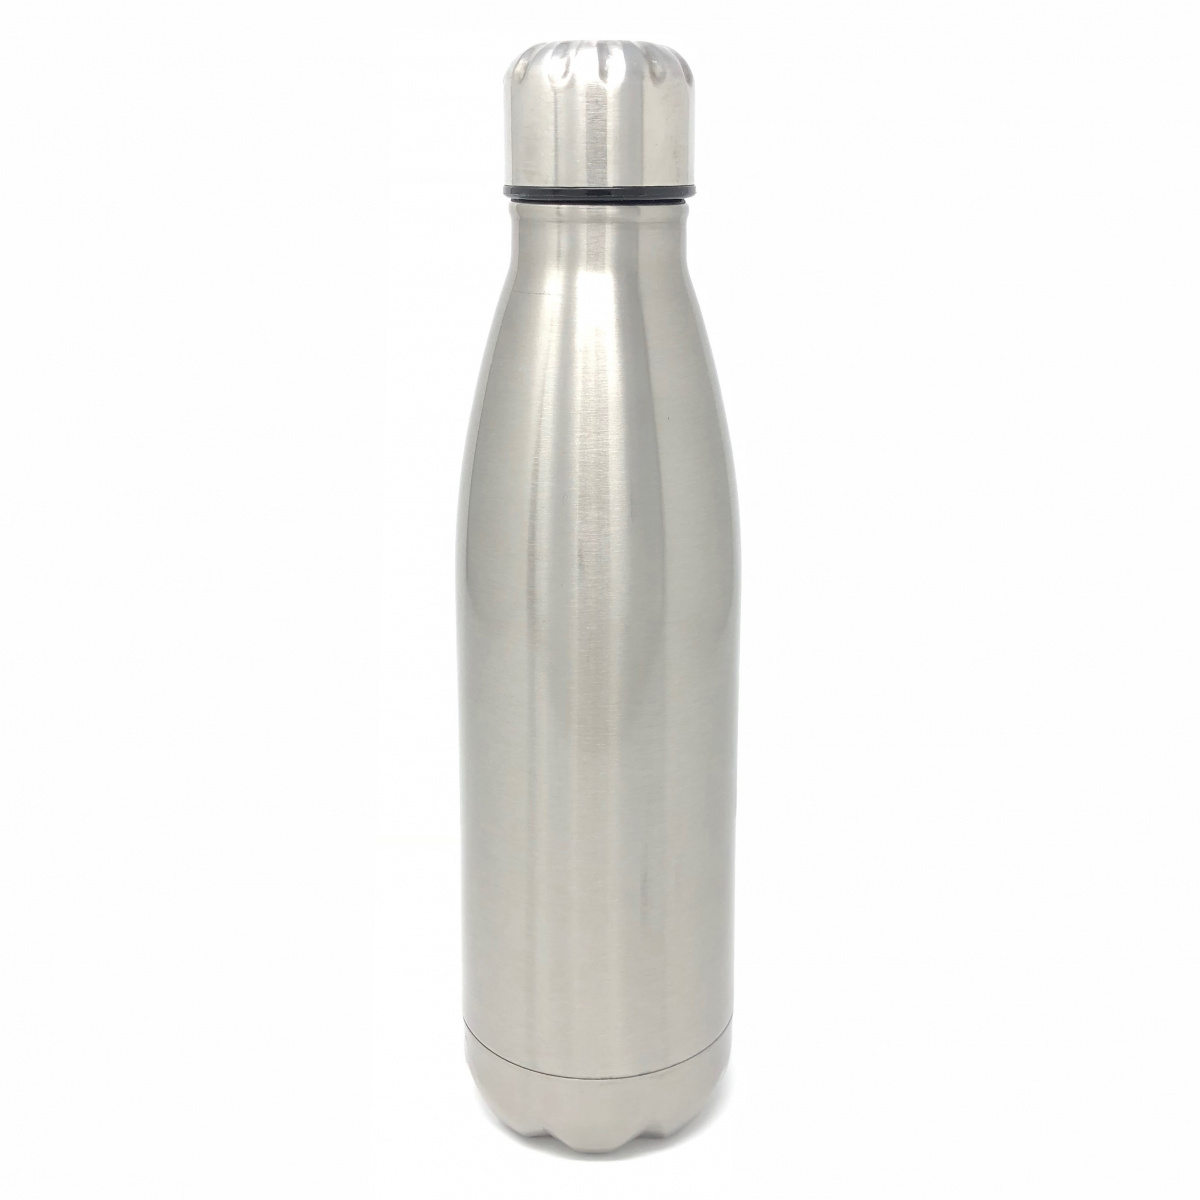 Pulito thermo drinking bottle in steel - 750 ml